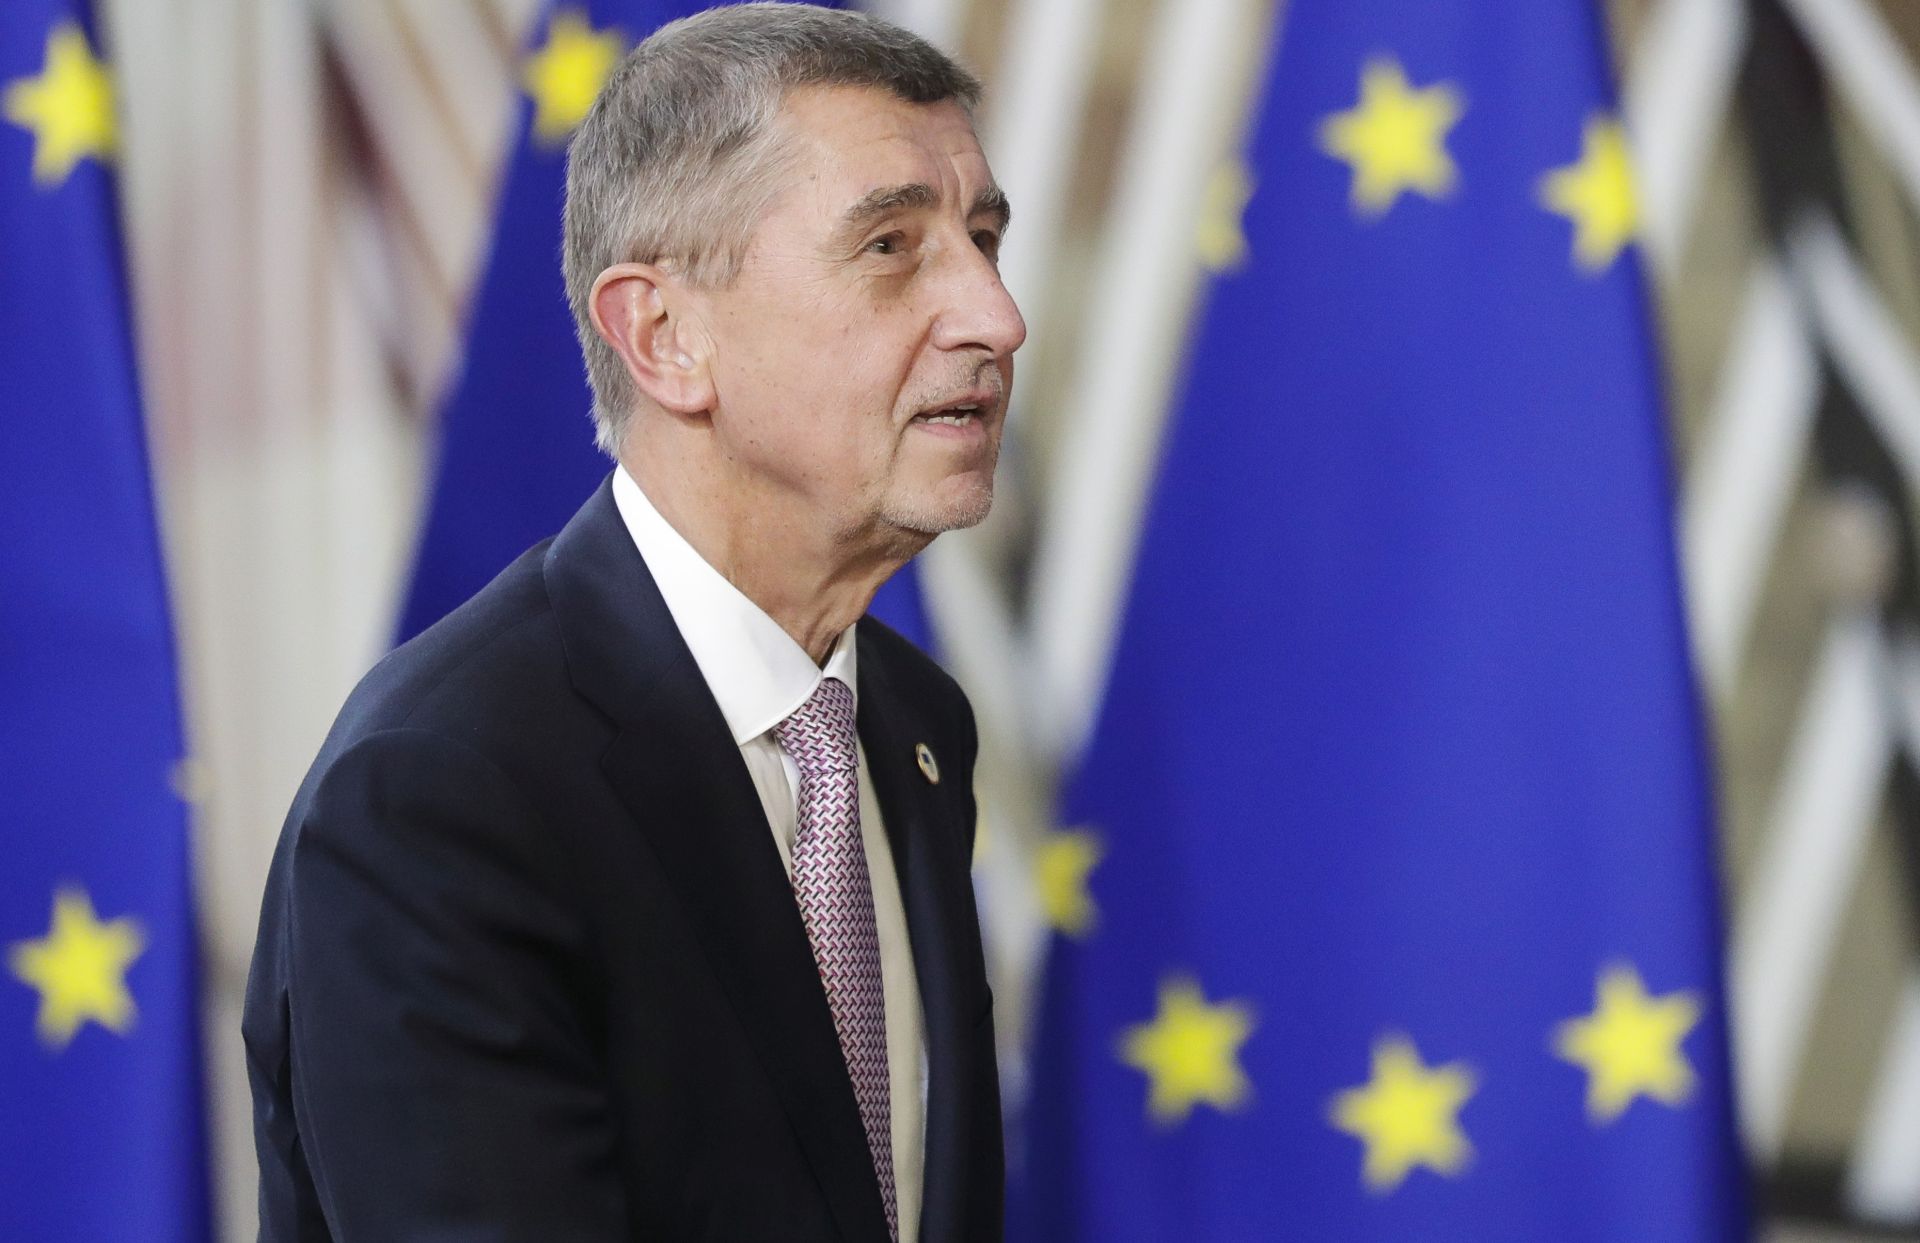 epa07453226 Czech Republic's Prime Minister Andrej Babis arrives at the European Council summit in Brussels, Belgium, 21 March 2019. European Union leaders gather for a two-day summit to discuss, among others, Brexit and British PM request to extend Article 50.  EPA/STEPHANIE LECOCQ